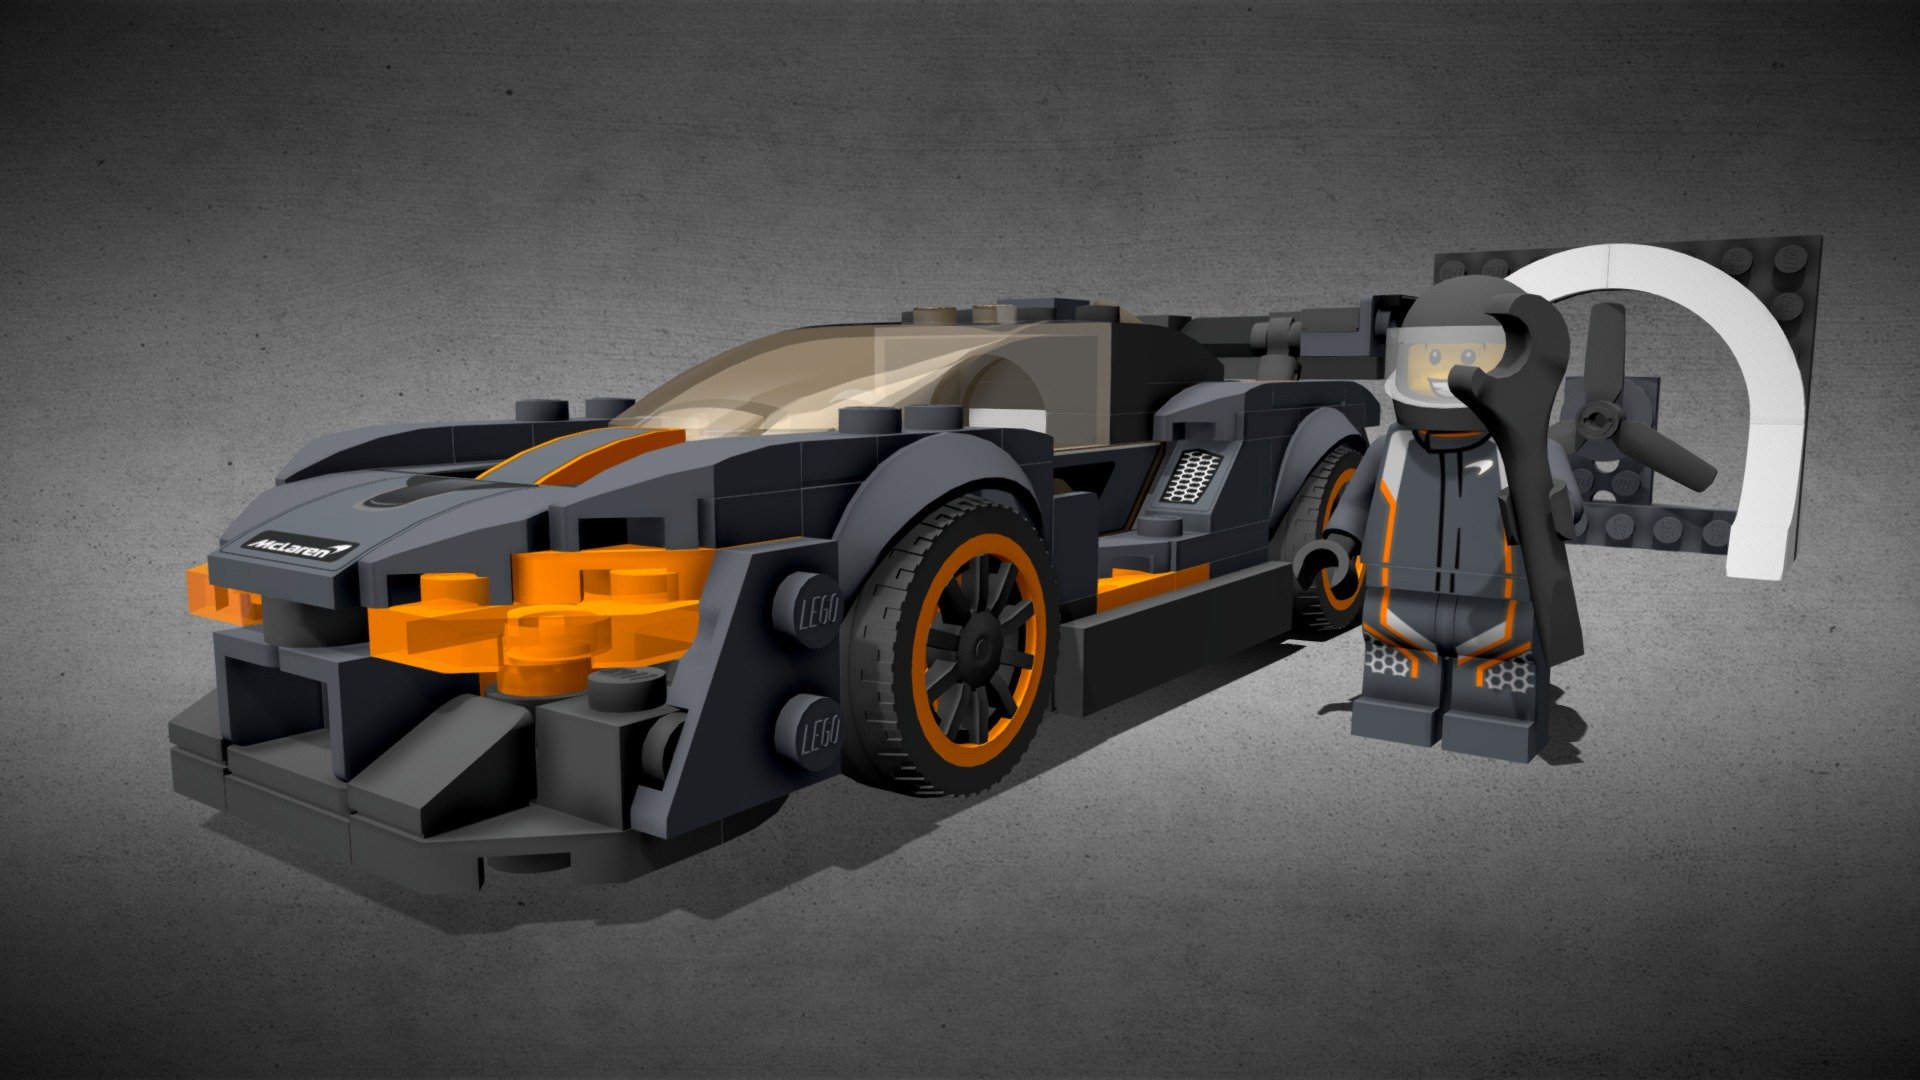 Complete car and minifigure from LEGO 75892 kit. All stickers and textures. It is not a scan, but a complete kit, contains all the cubes. Includes MCLAREN SENNA, 1x minifigure and 1x fan 3d model